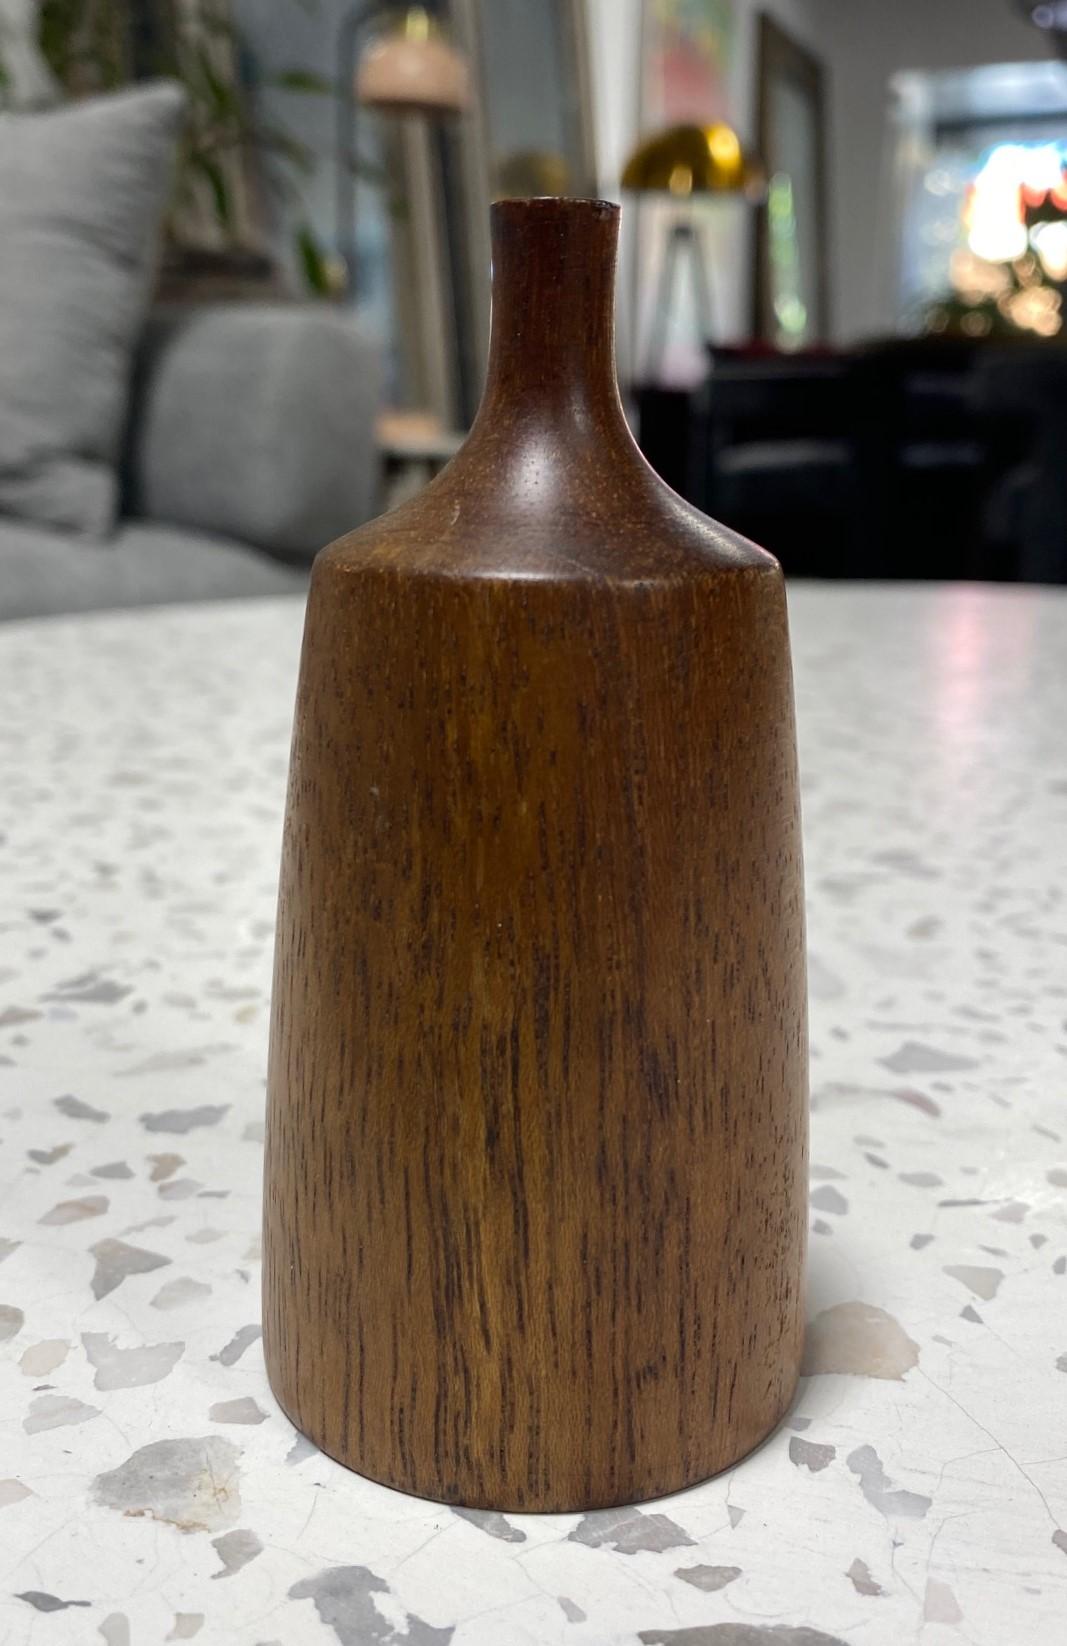 A beautifully executed, handmade, wood-turned sculptural weed vase by master woodturner Rude Osolnik who is widely regarded, along with Bob Stocksdale, as one of the finest woodturners in American woodturning history. In 1992, he was presented by